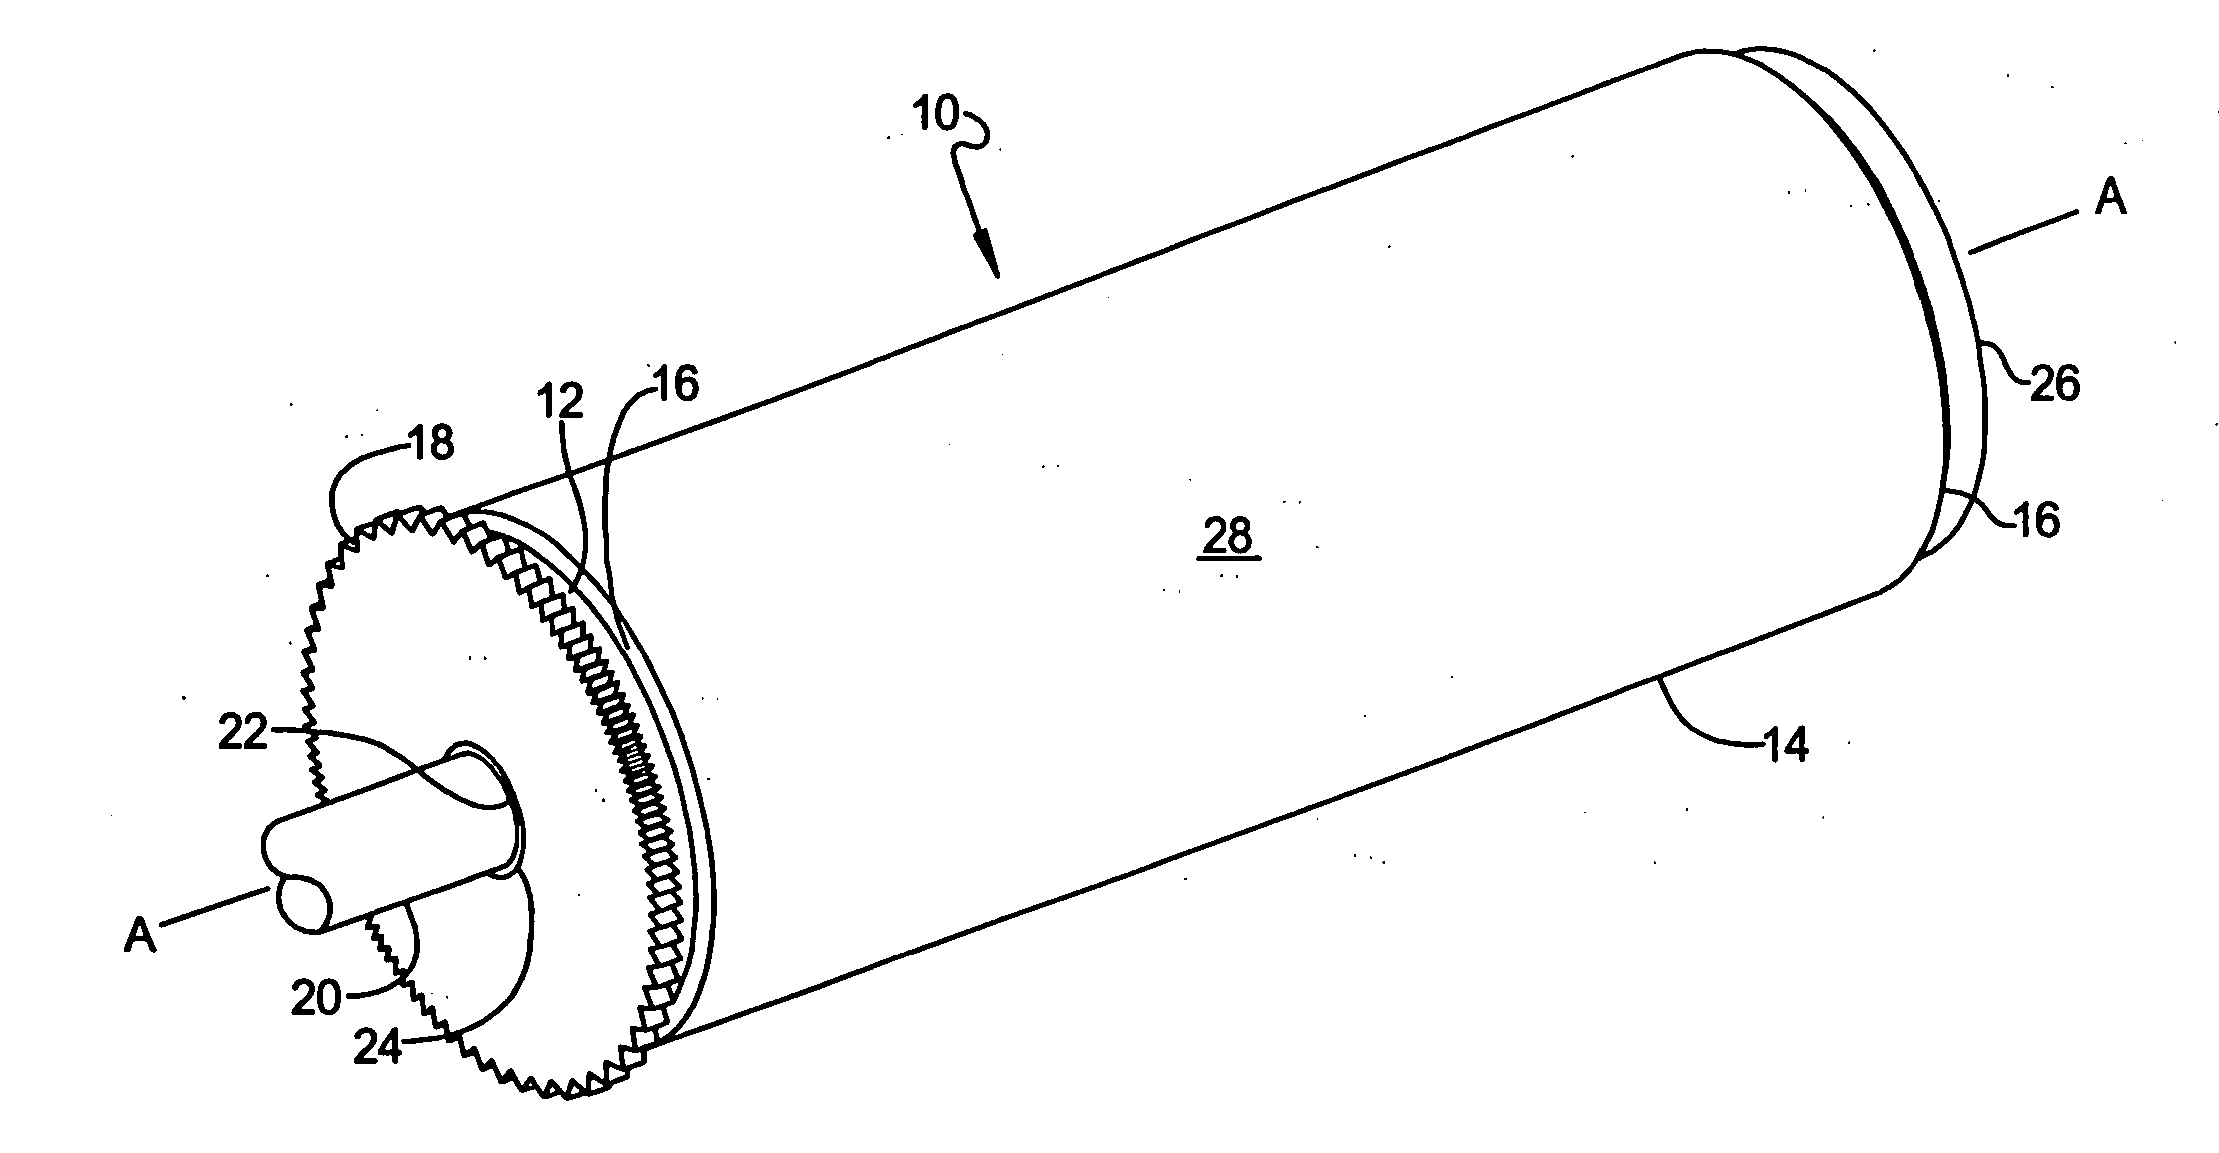 Apparatus and method of enhancing printing press cylinders